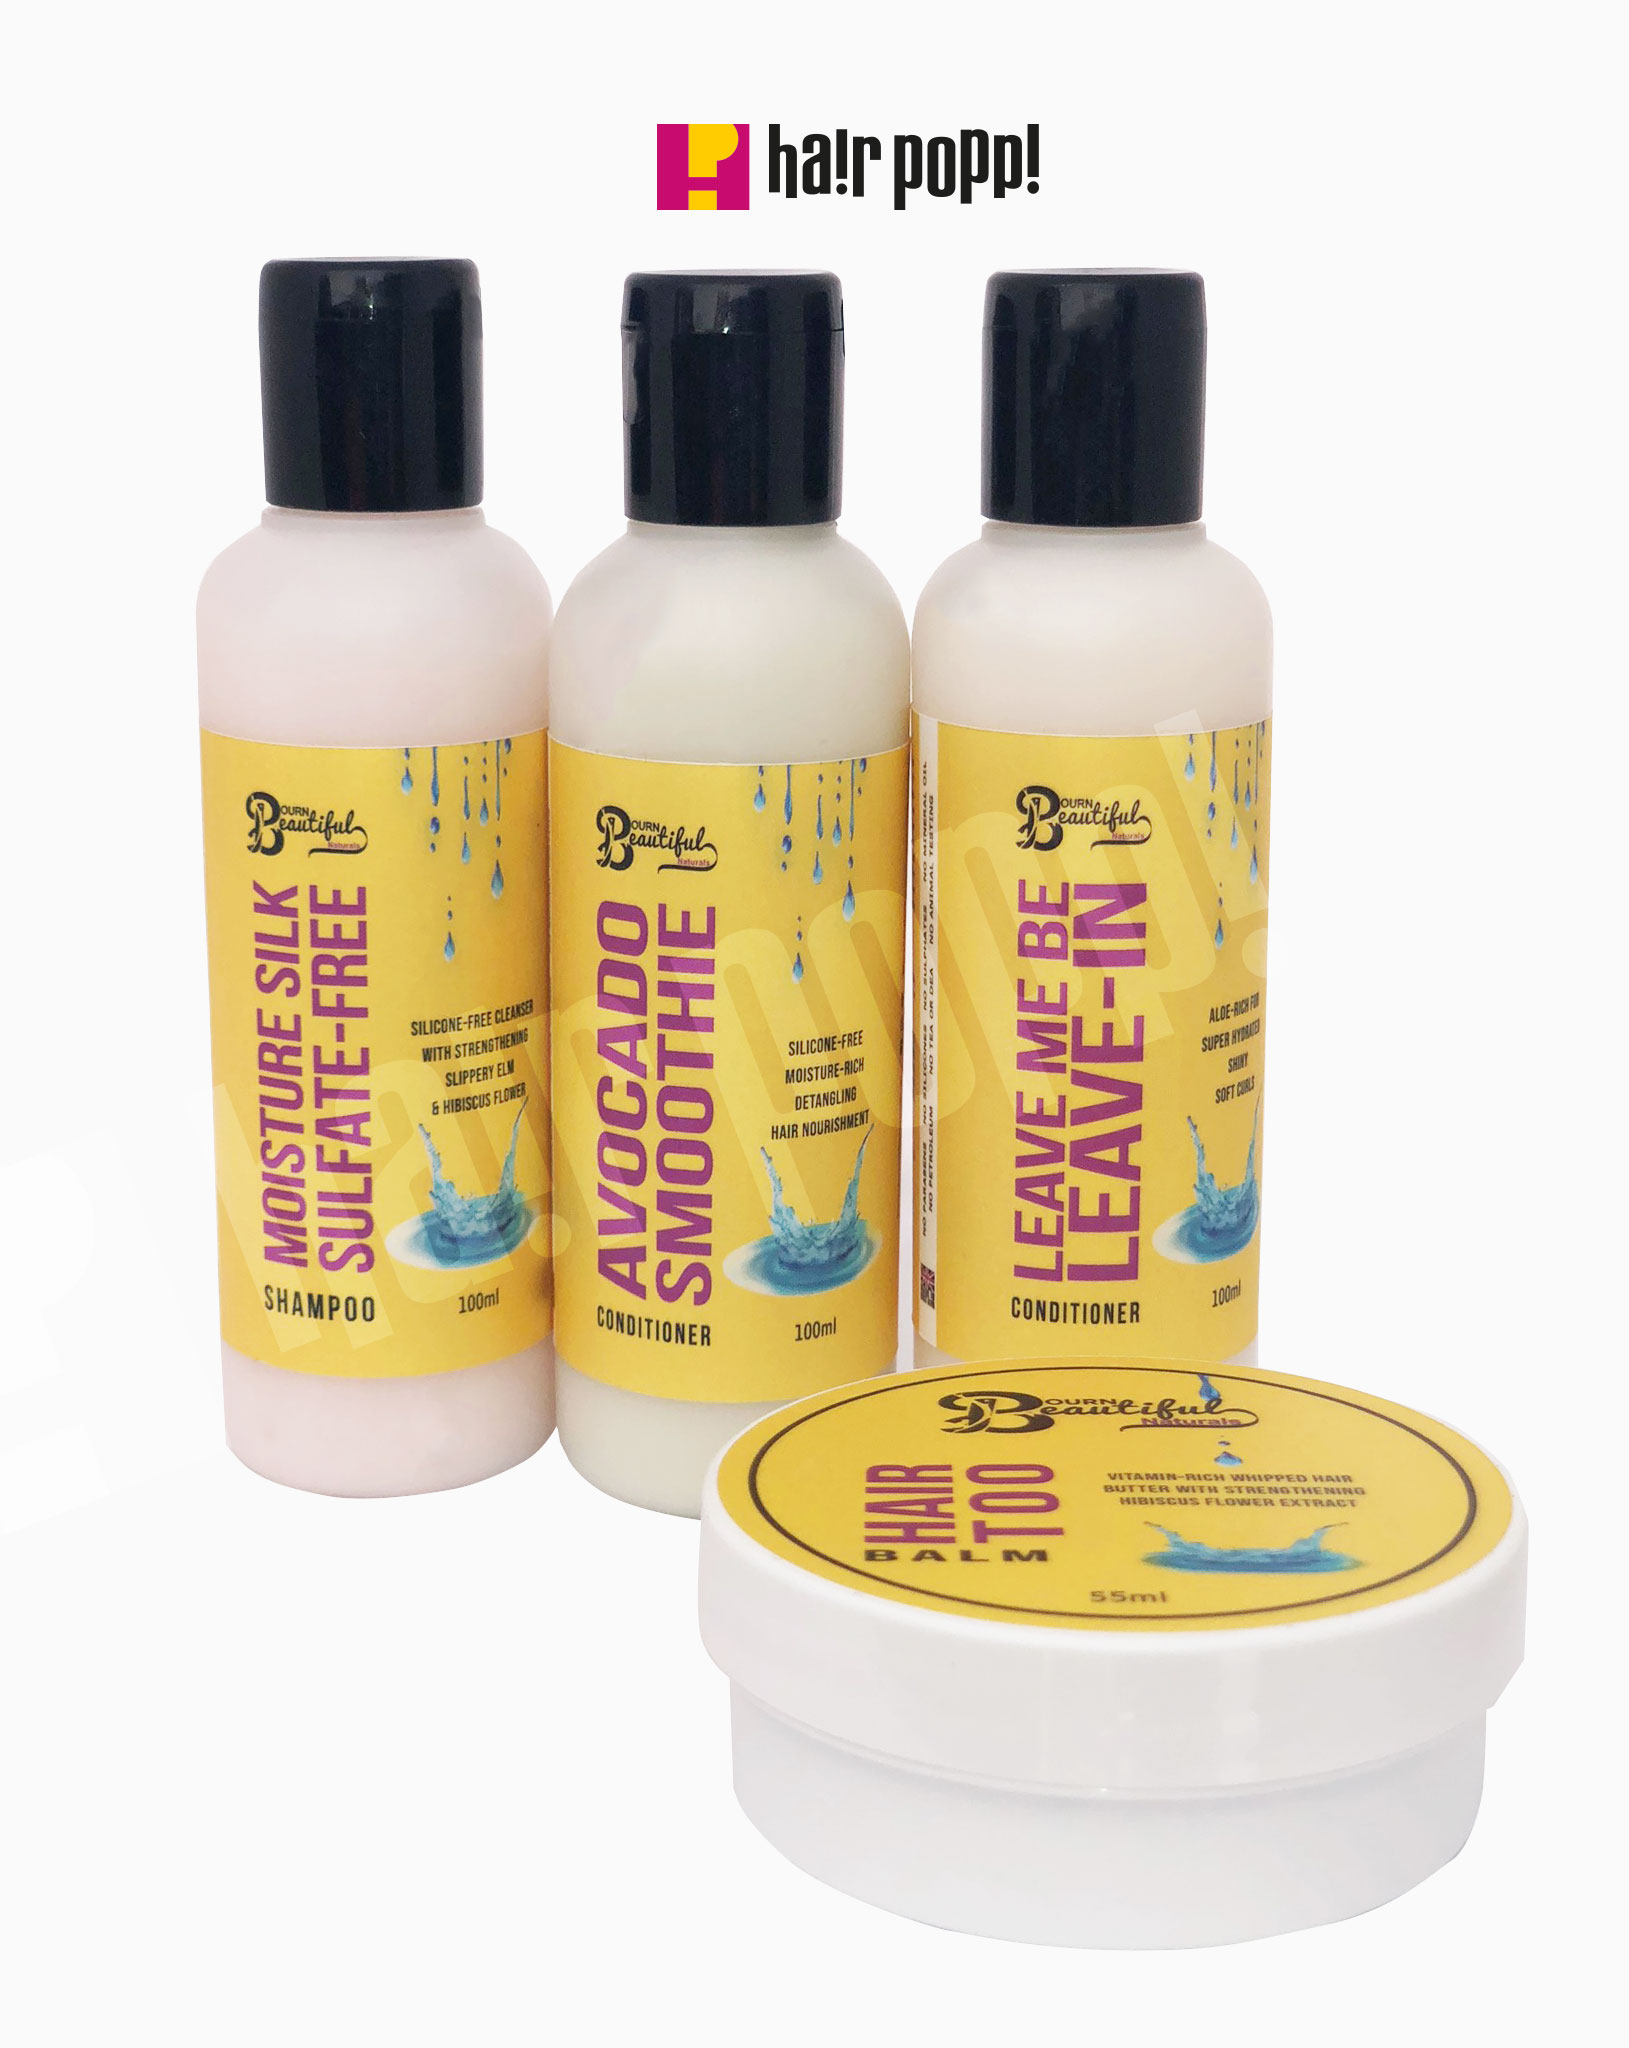 Bourn Beautiful Naturals Wash Day Essentials Kit Hair Popp Afro Hair Subscription Boxes -Bourn Beautiful Hair Kit